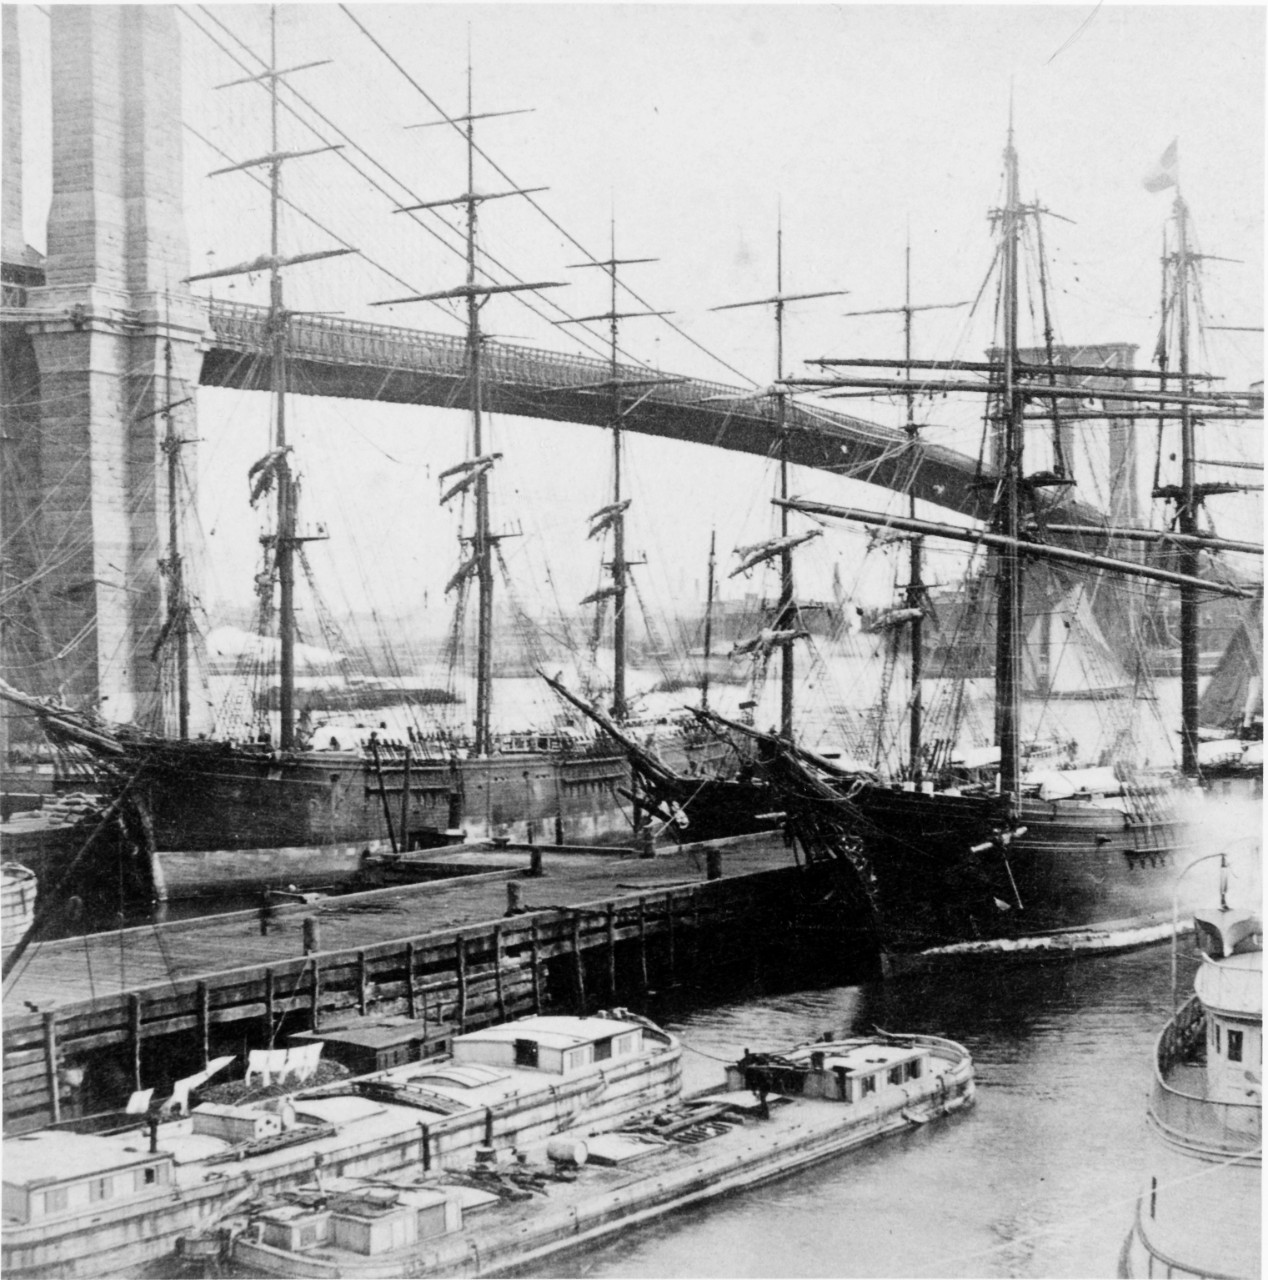 "The Glory of New York". Three-masted Wooden Sailing Merchant Ships at Piers, near the Brooklyn Bridge, circa the 1880s